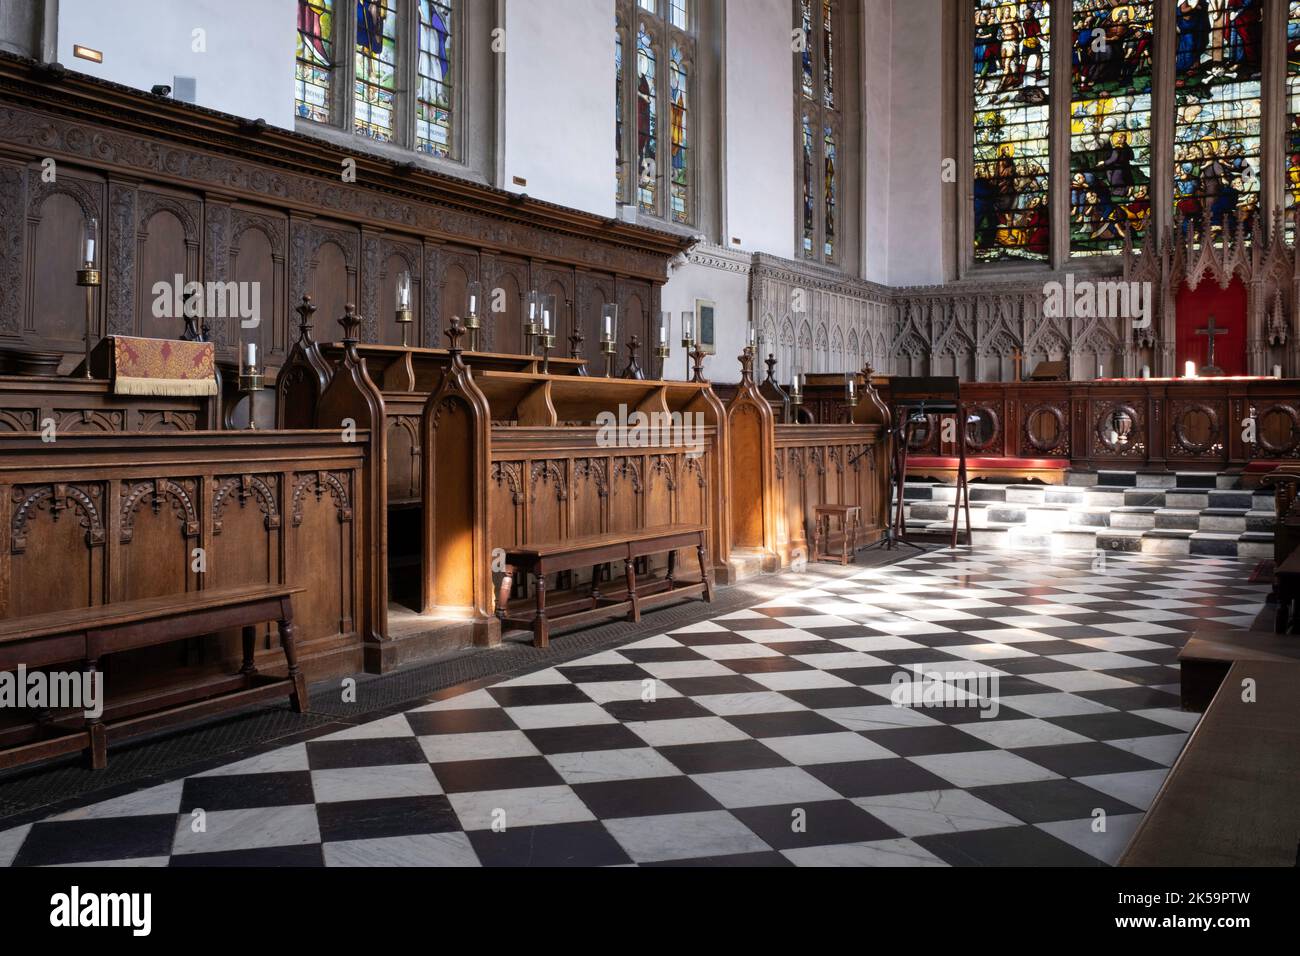 Chapel Magdalen College Oxford interior with benches of the Oxford University Stock Photo